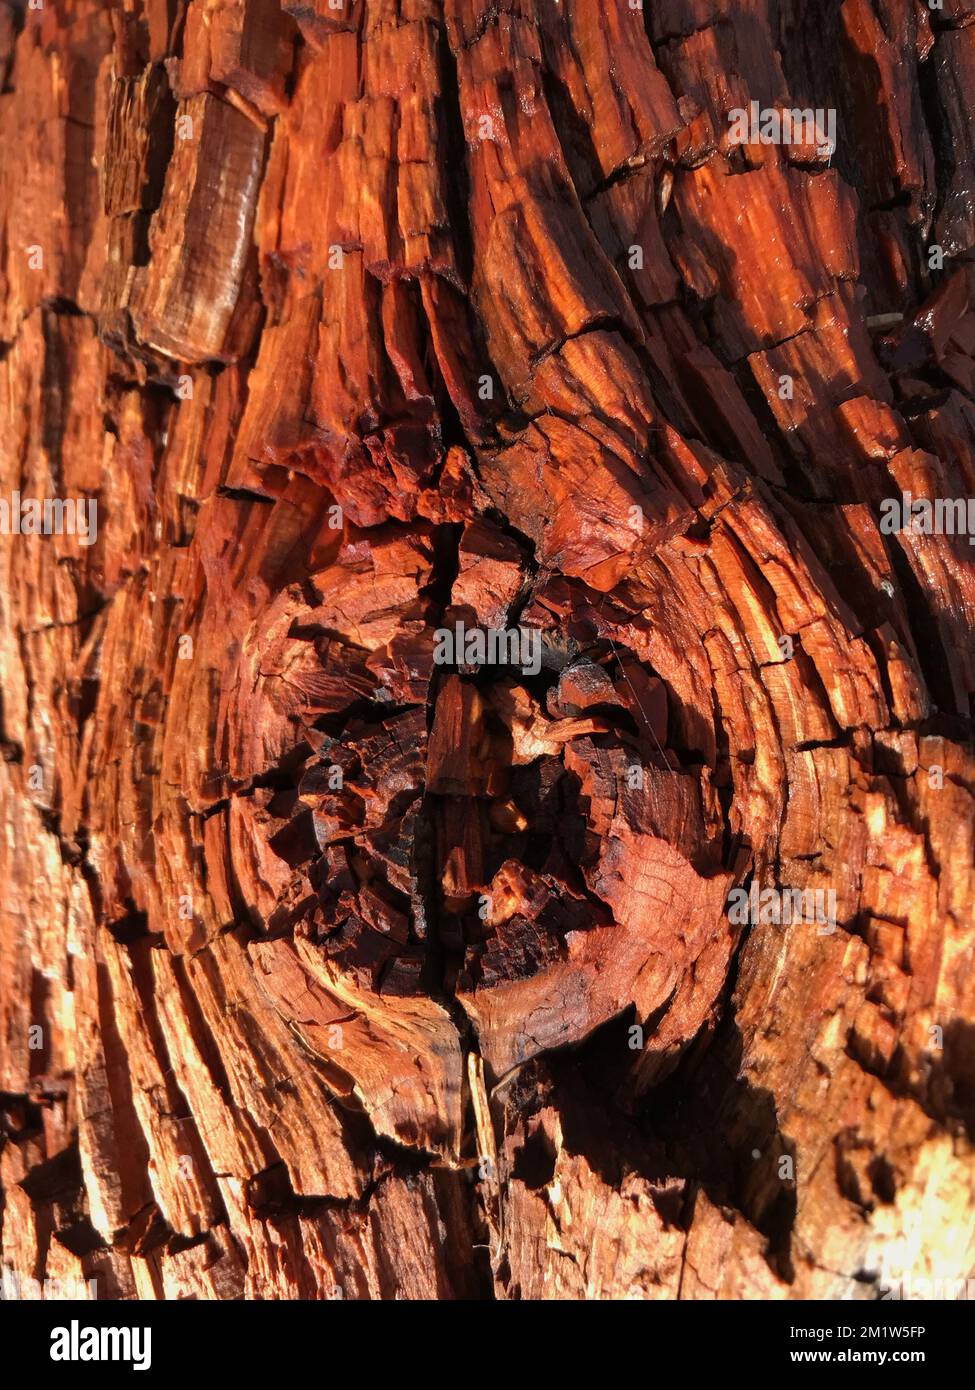 Close up of very weathered driftwood from Scots pine tree (Pinus sylvestris) Bark is pinkish-red with deep grooves and fissures that deepen with age. Stock Photo